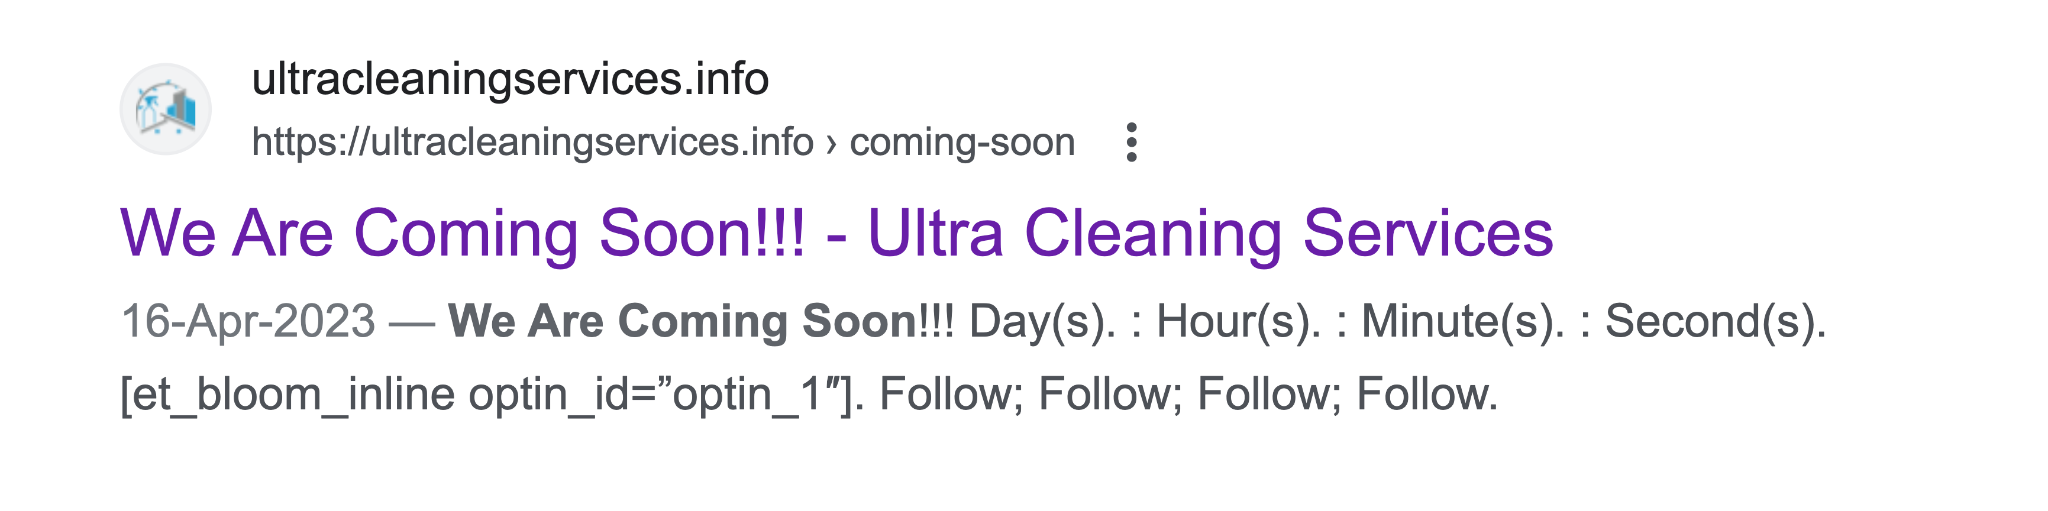 ultra cleaning services search page